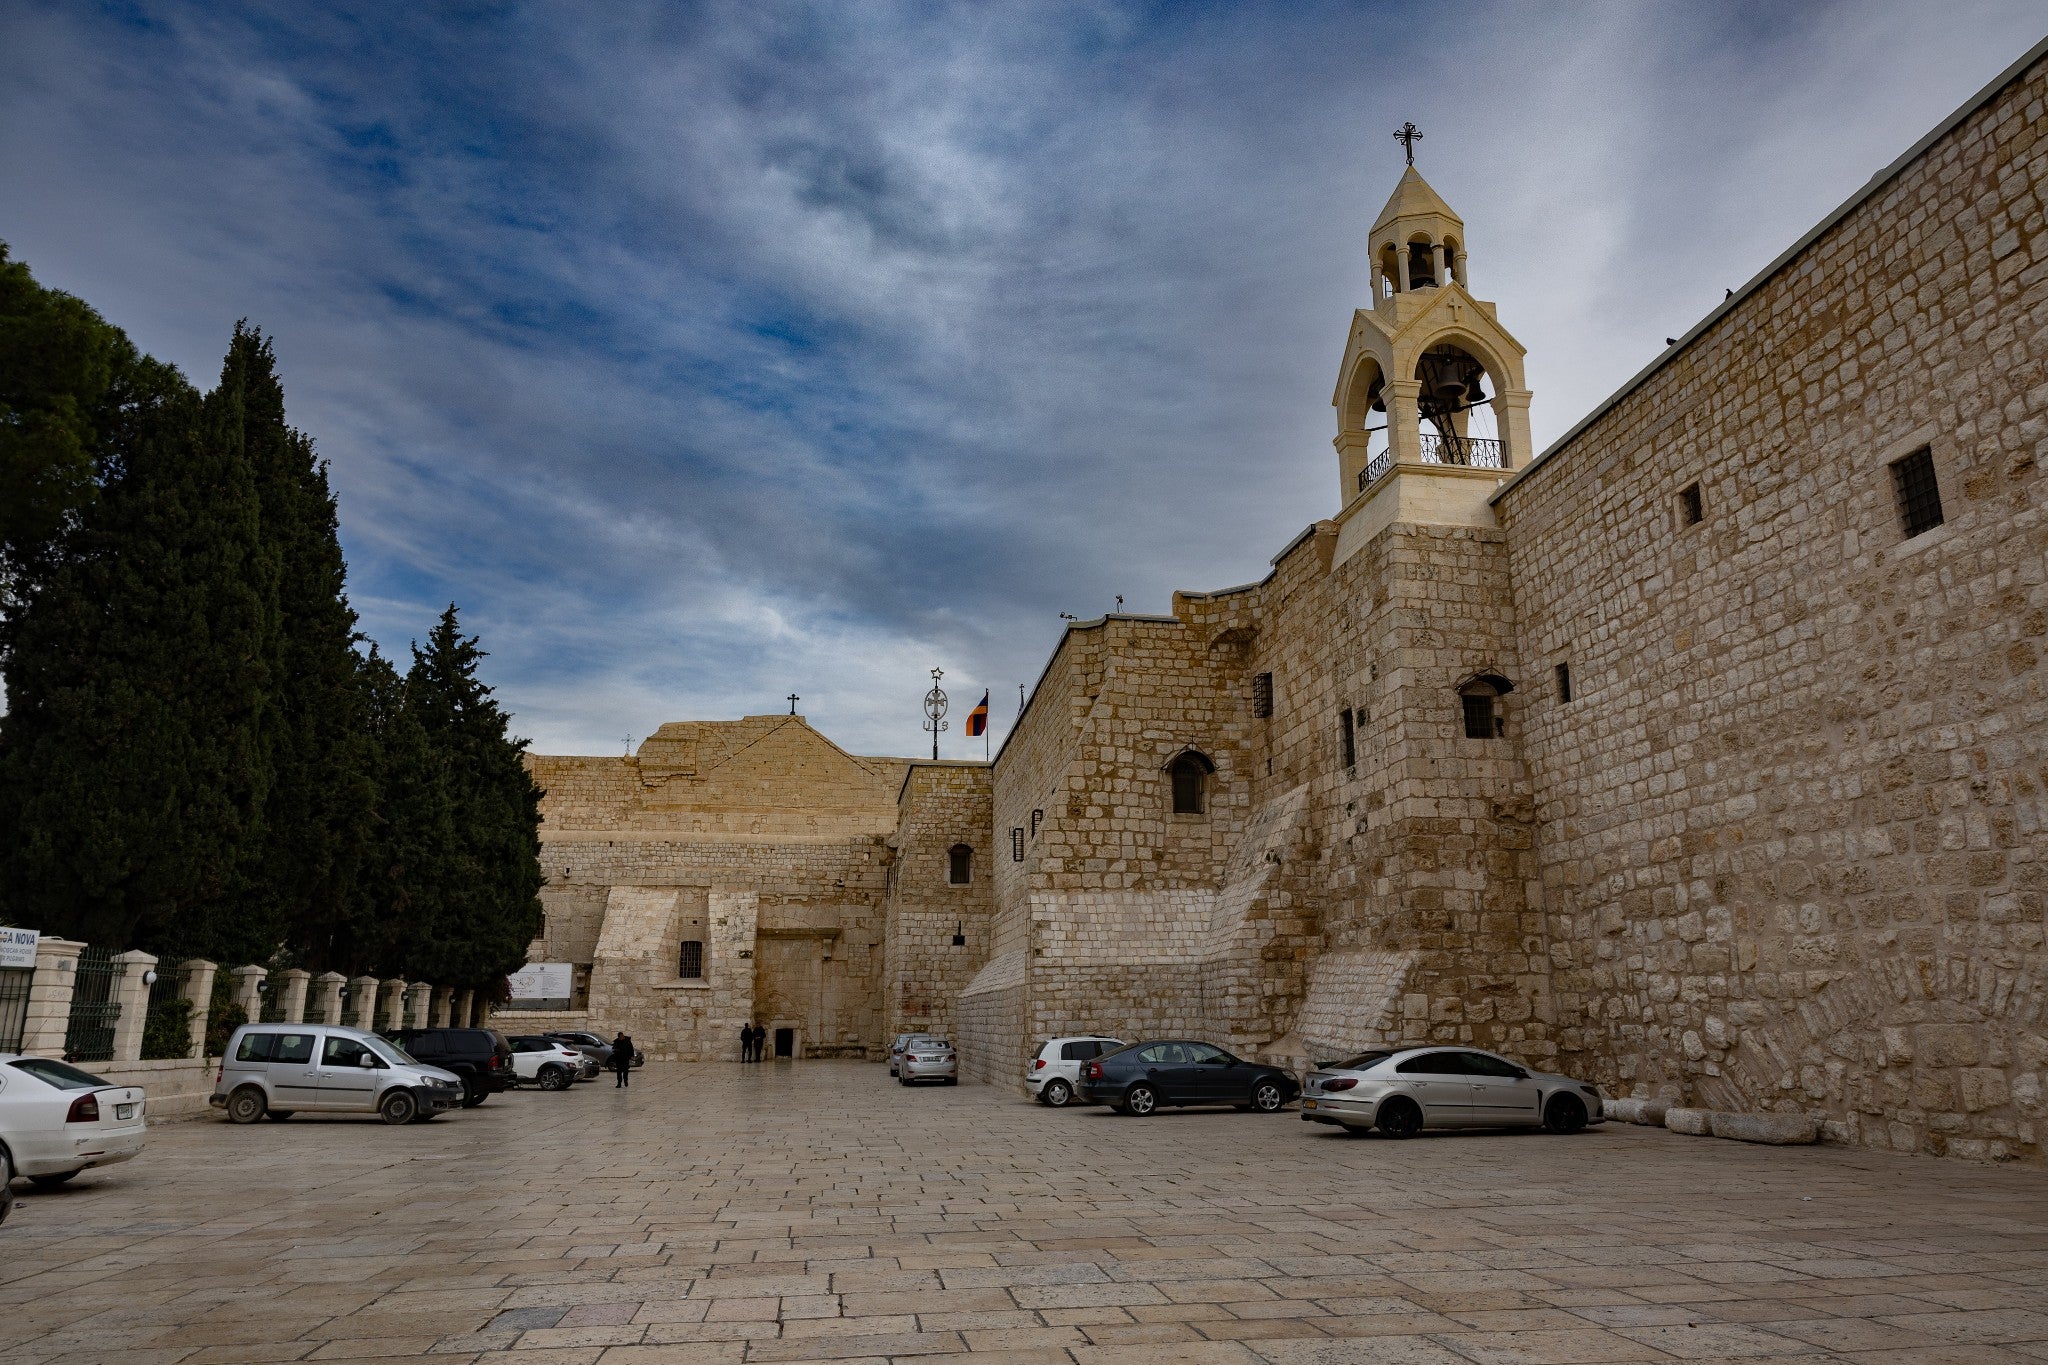 Bethlehem would normally be full of visitors at this time of year